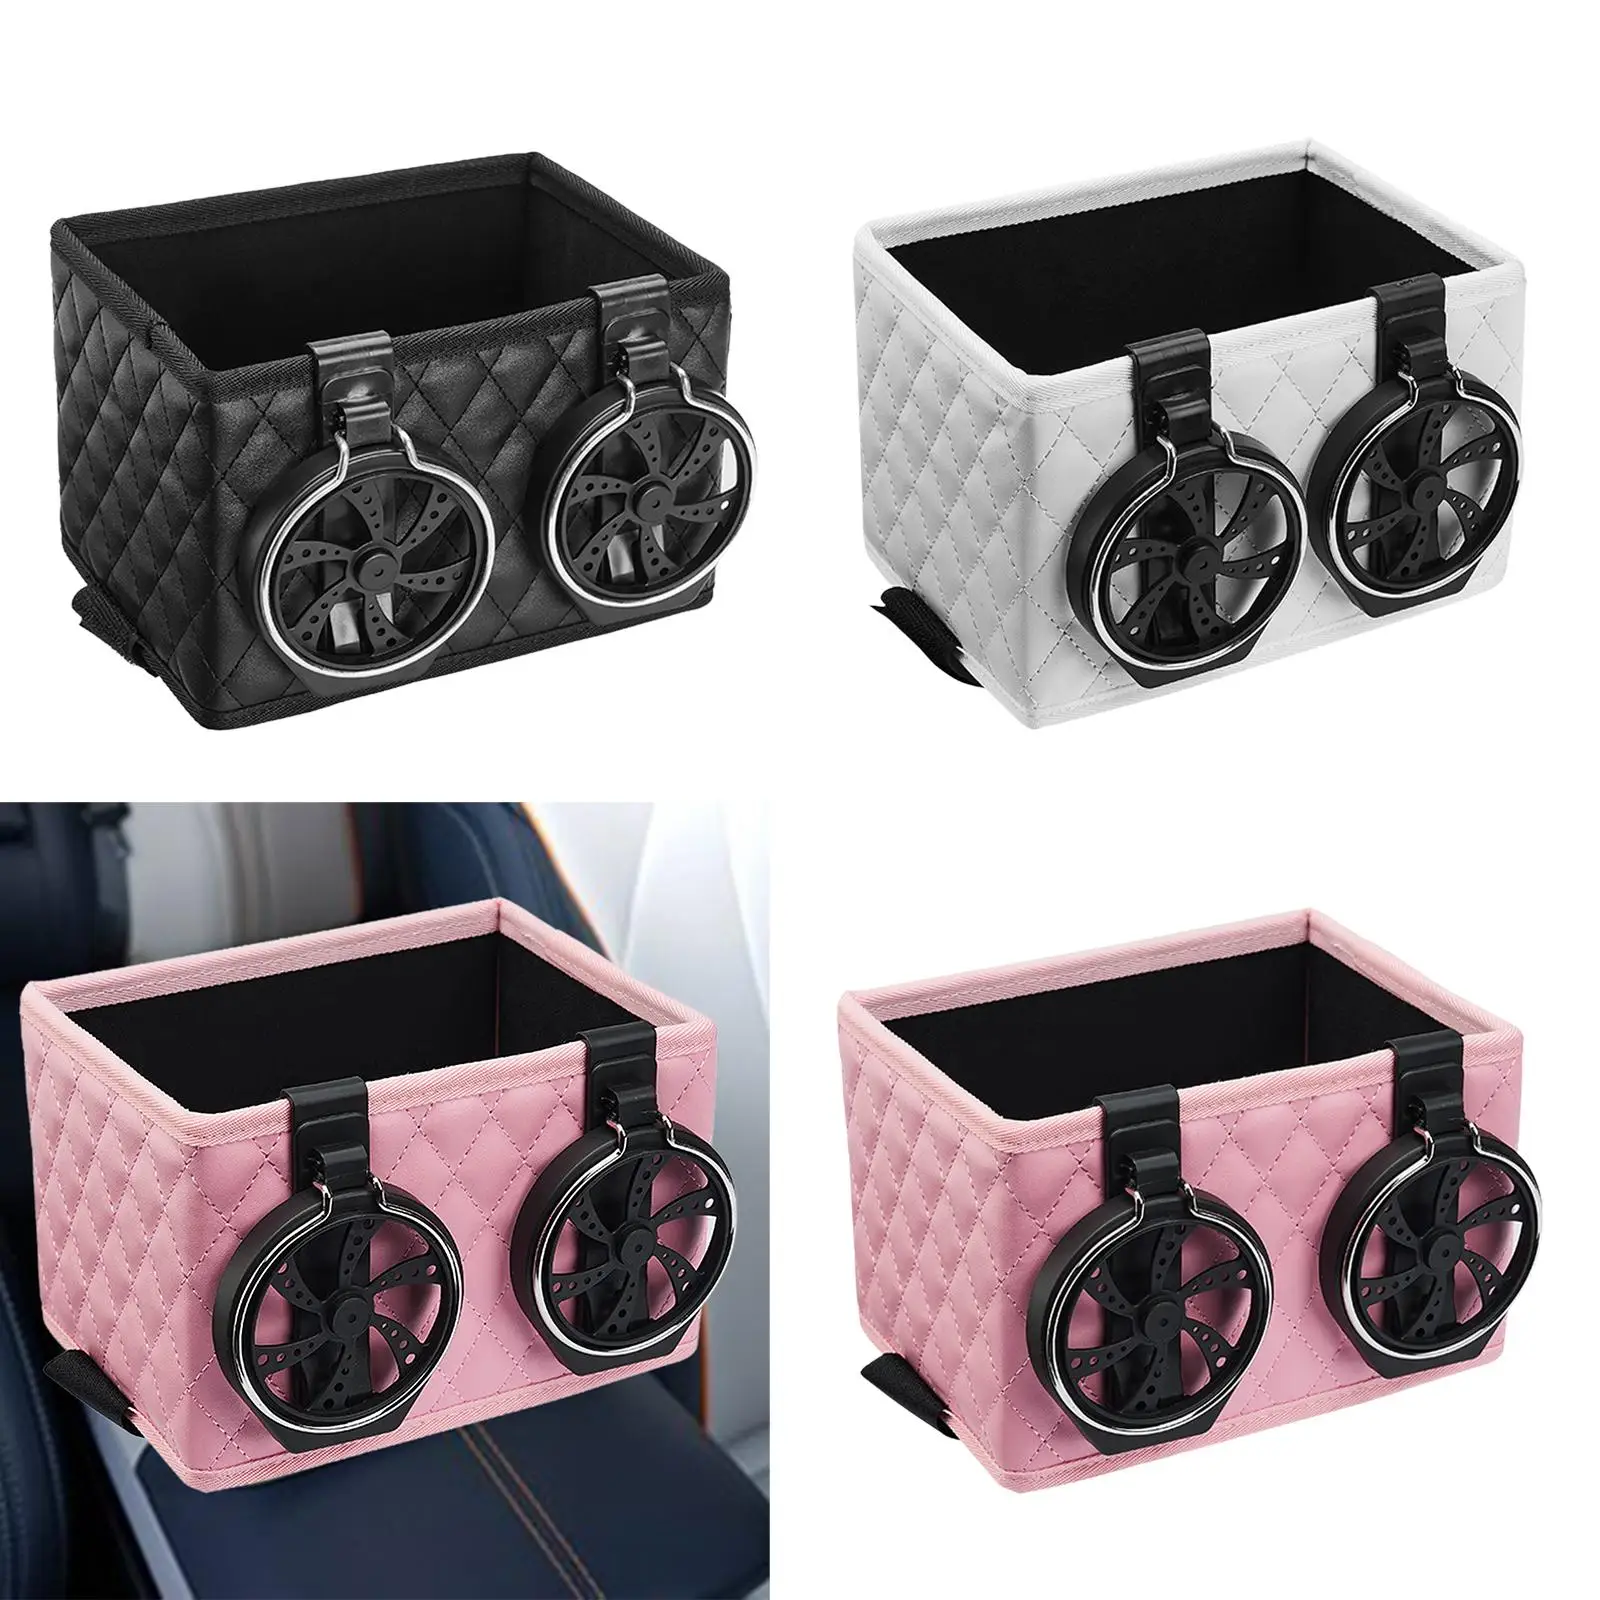 Cup Holder Multifunctional car Console Foldable Gadgets Holder Tissue Box Car Armrest Storage Box for Paper Towels Cellphones